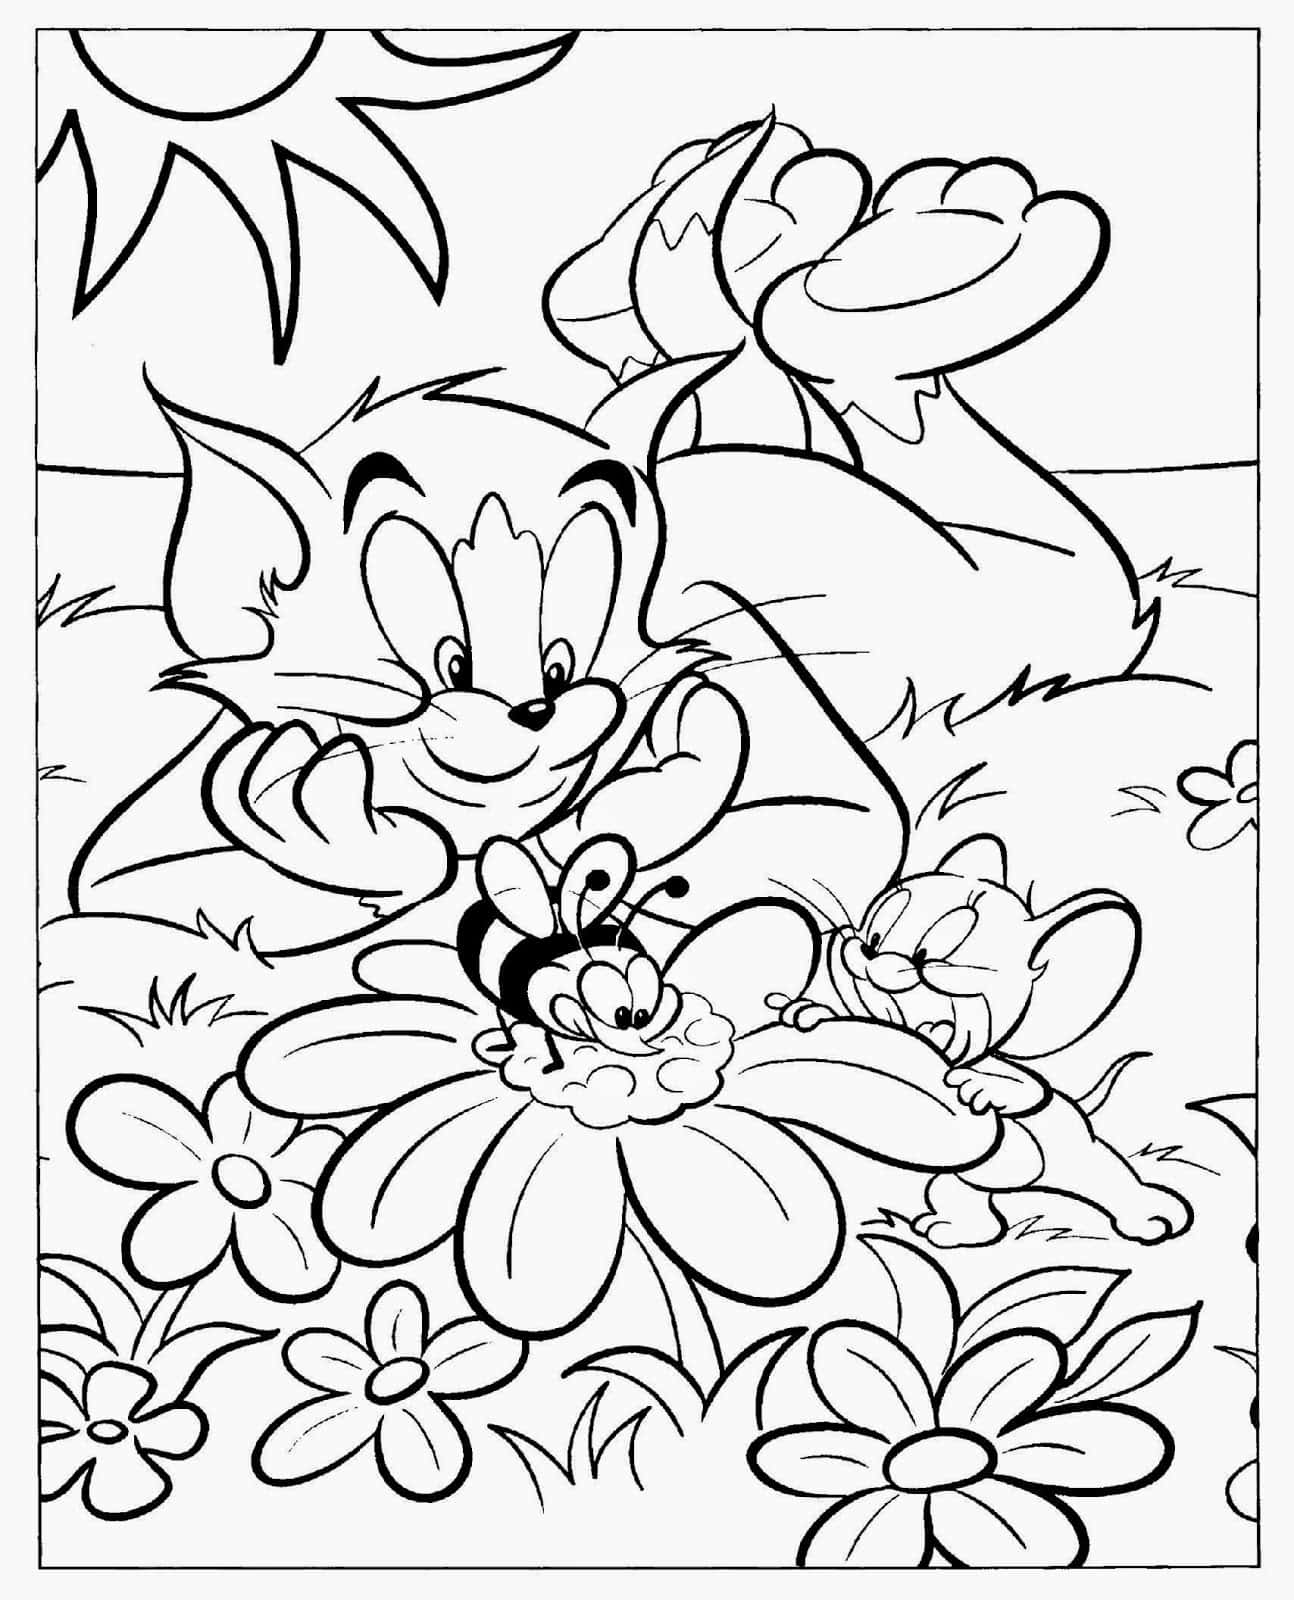 Create a masterpiece by coloring this fun cartoon design!